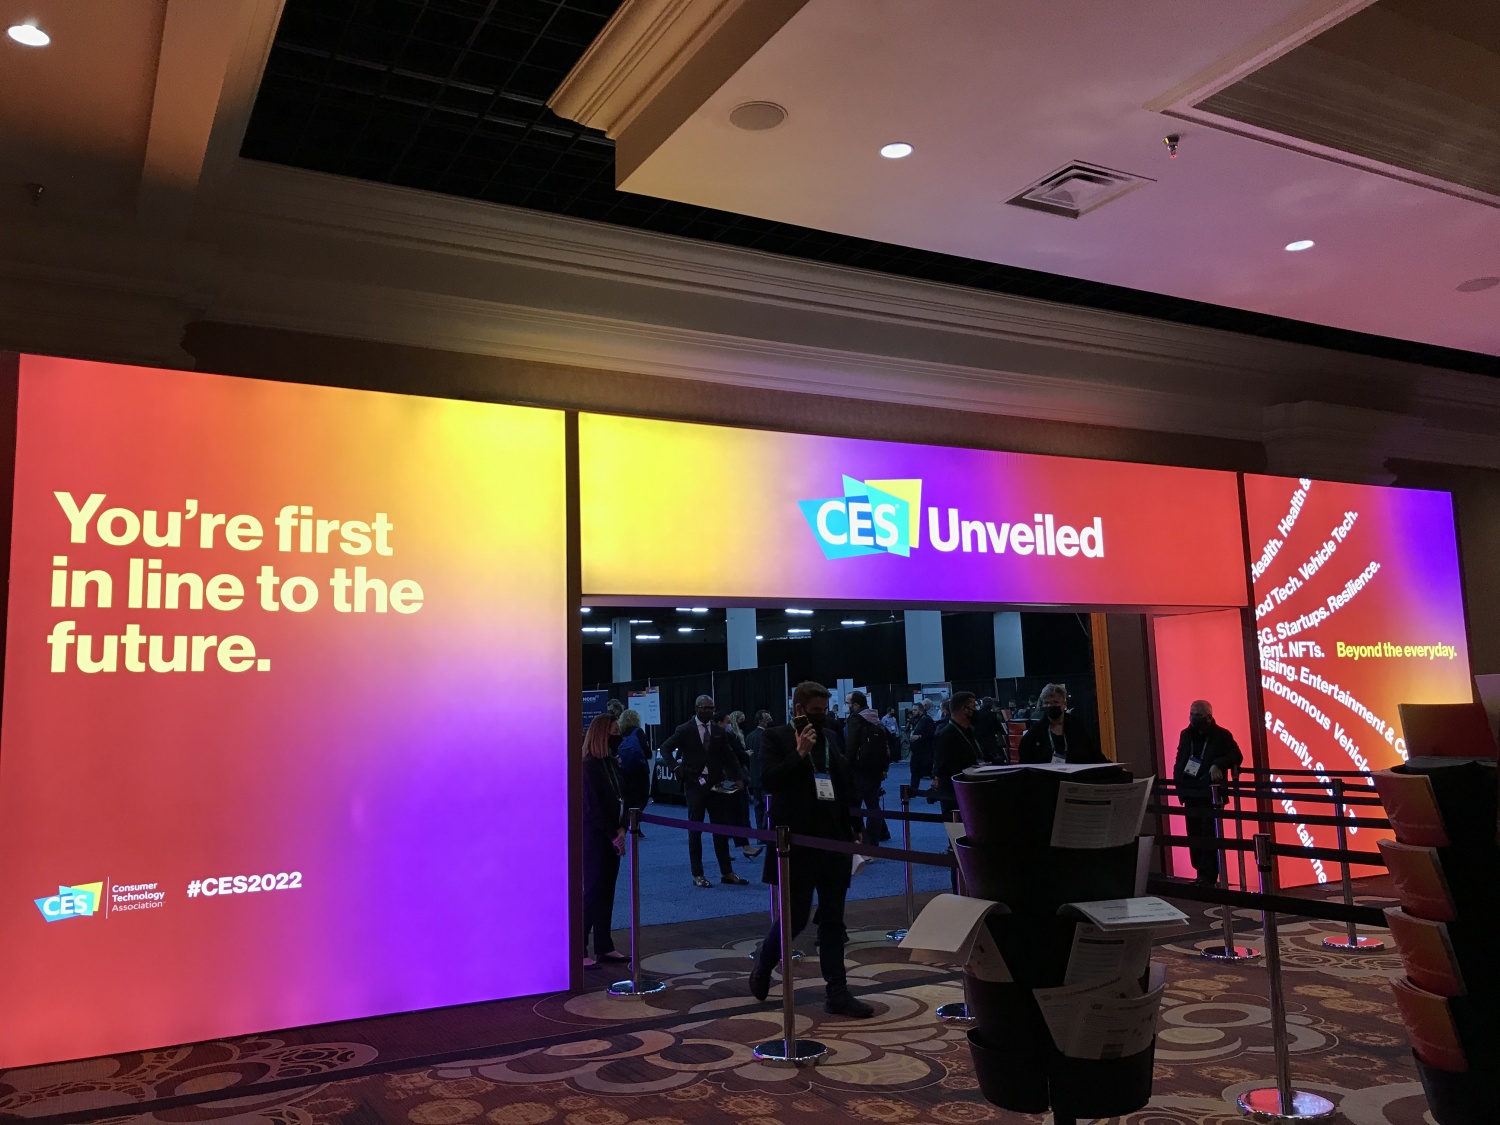 CES Unveiled invites a host of interesting technological insights